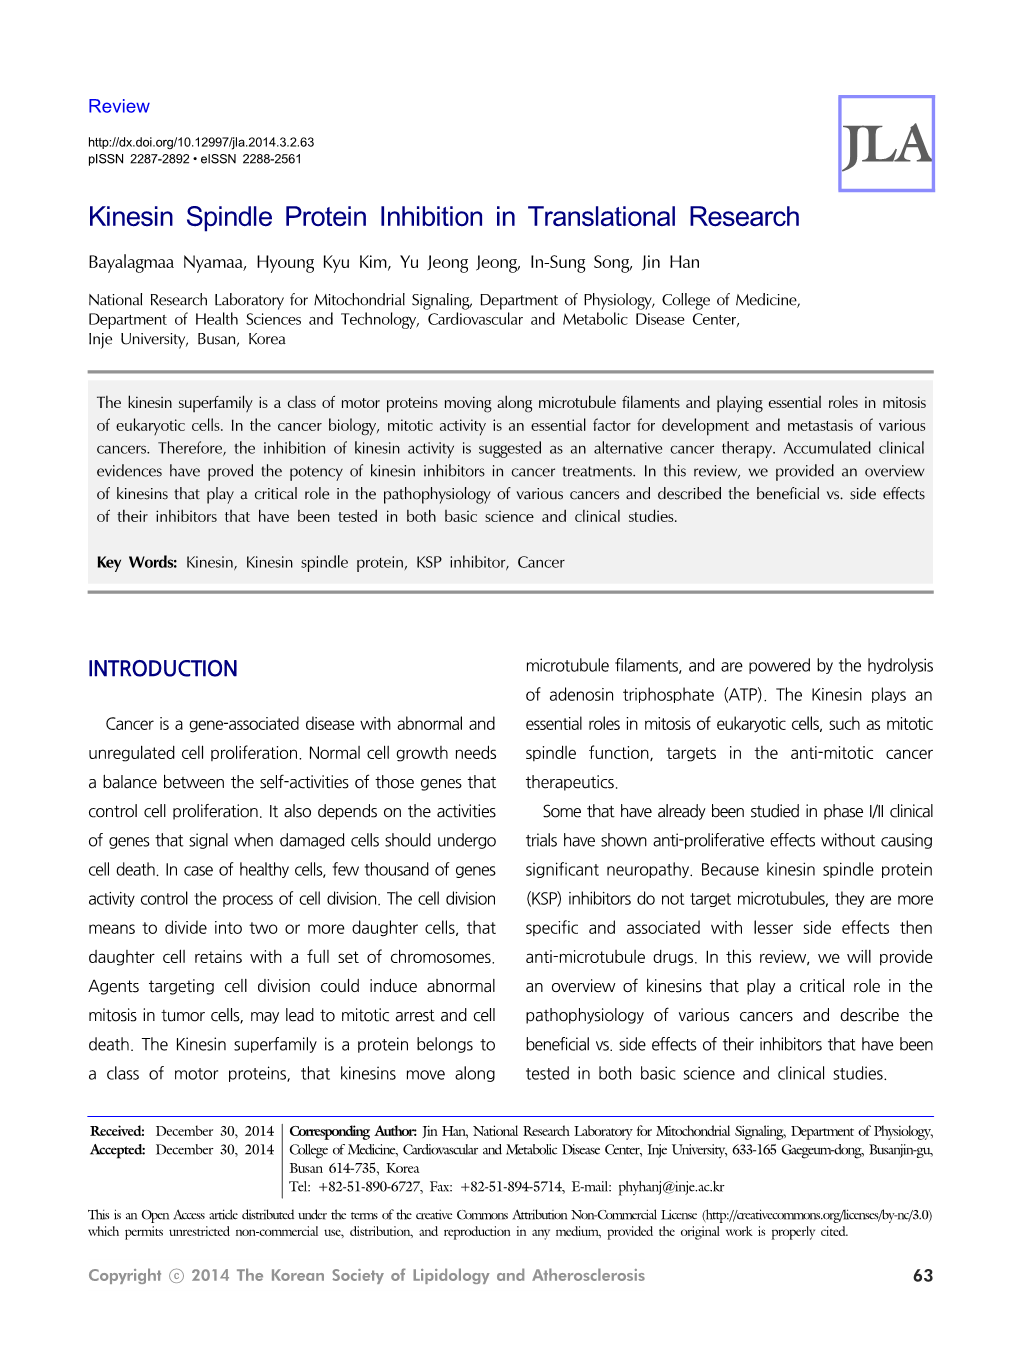 Kinesin Spindle Protein Inhibition in Translational Research